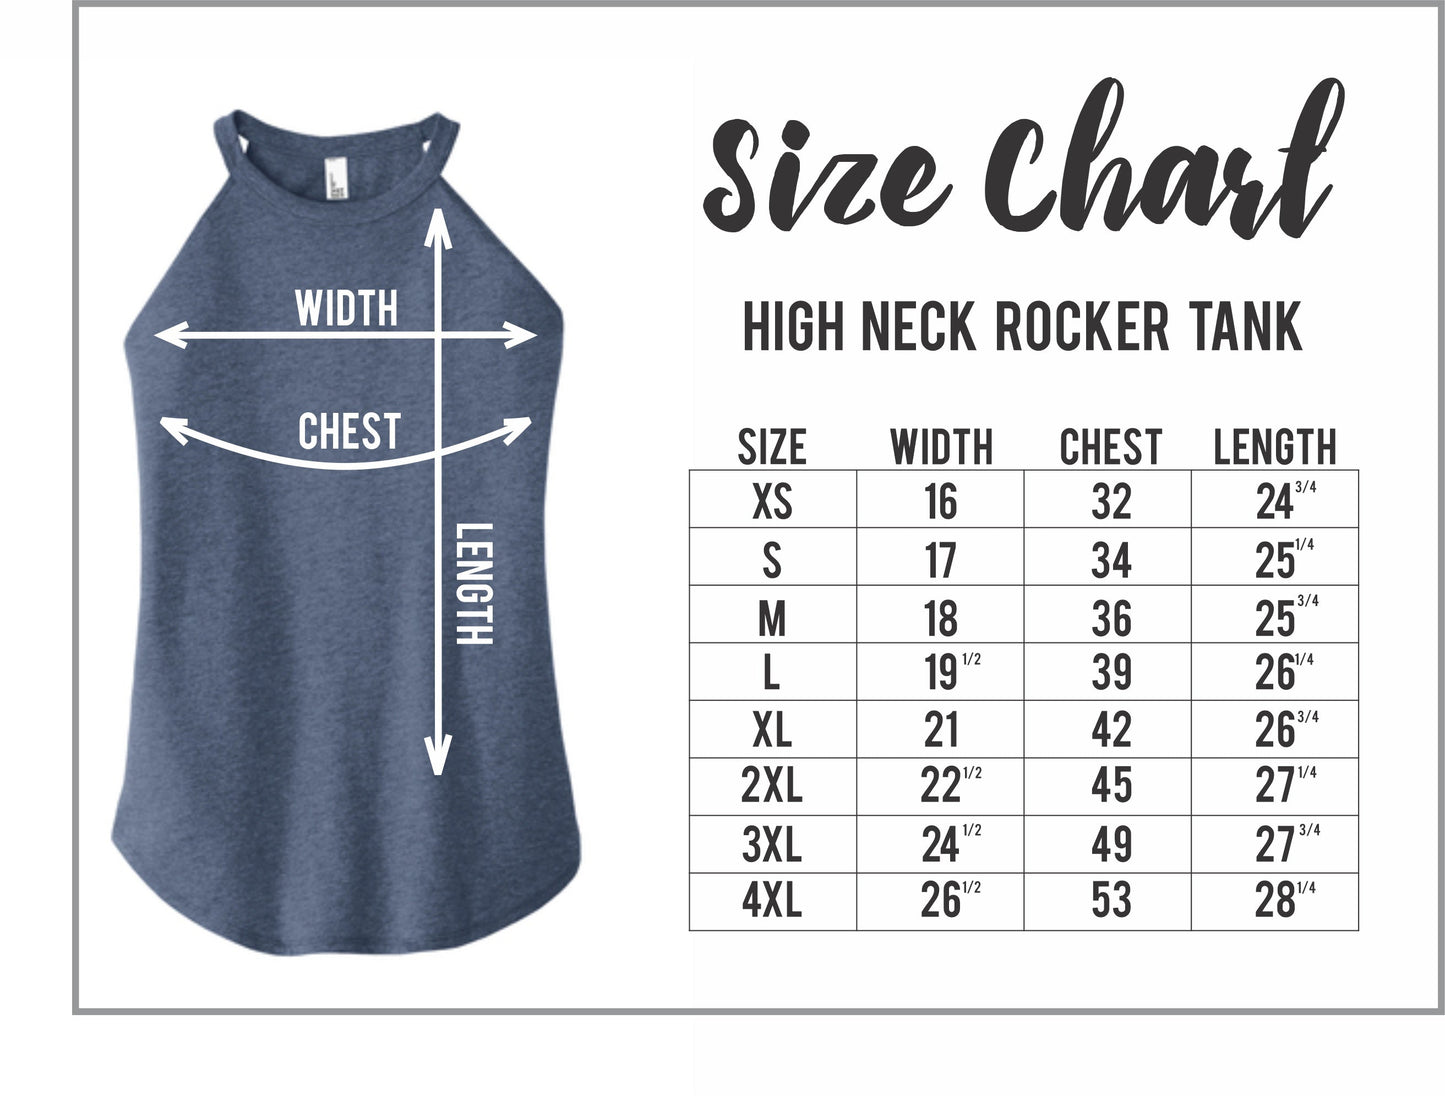 I'm not a Hot Mess I'm a Spicy Disaster - High Neck Rocker Tank